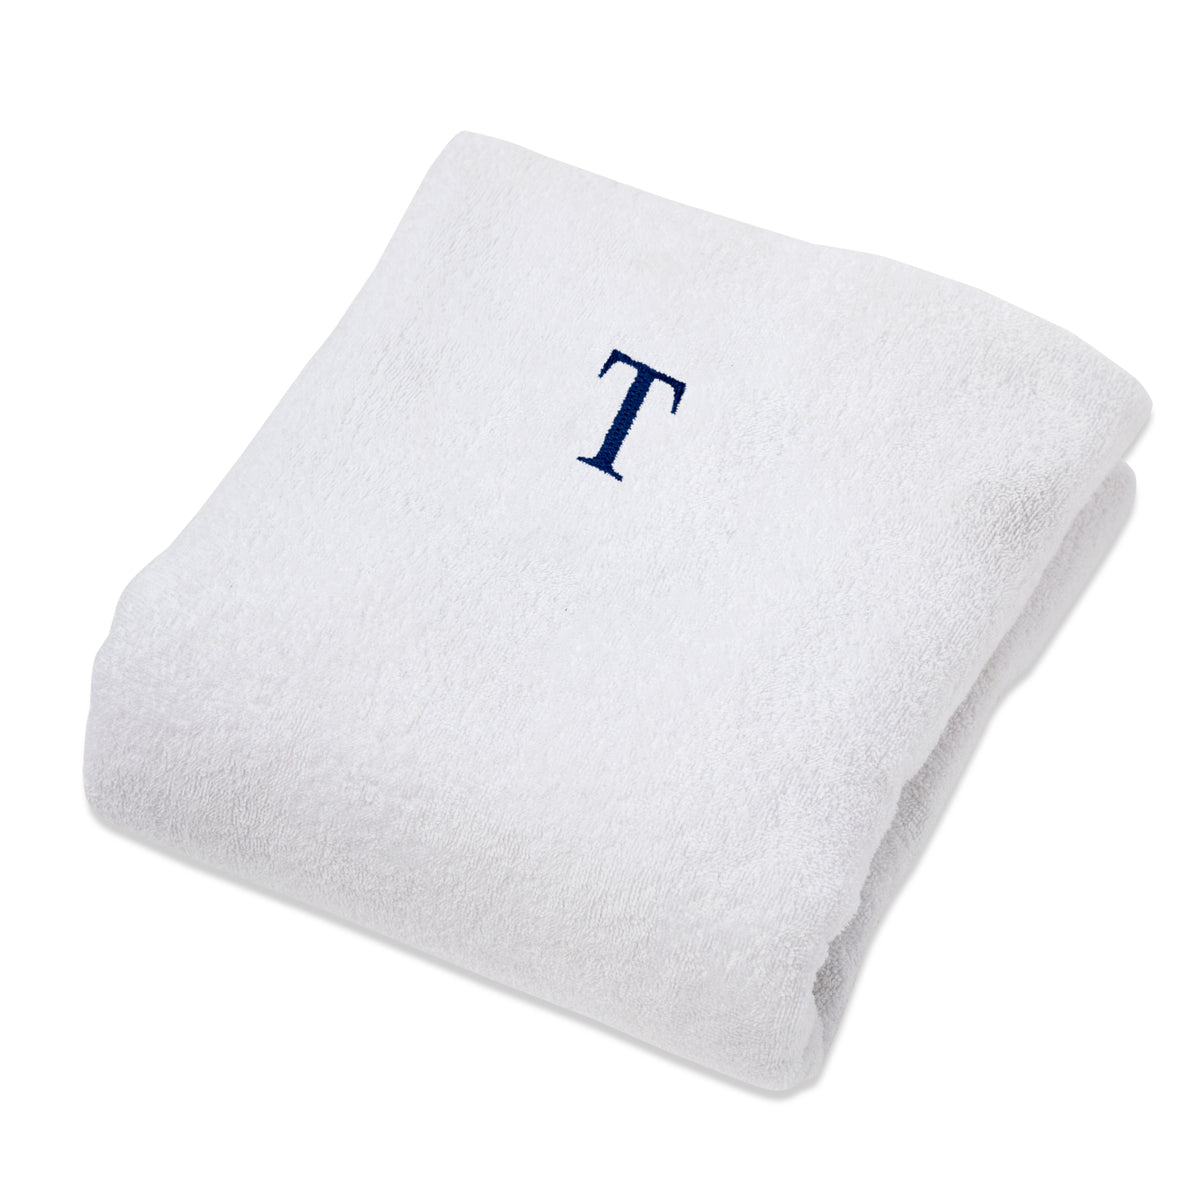 Superior Monogrammed Combed Cotton Lounge Chair Cover - T